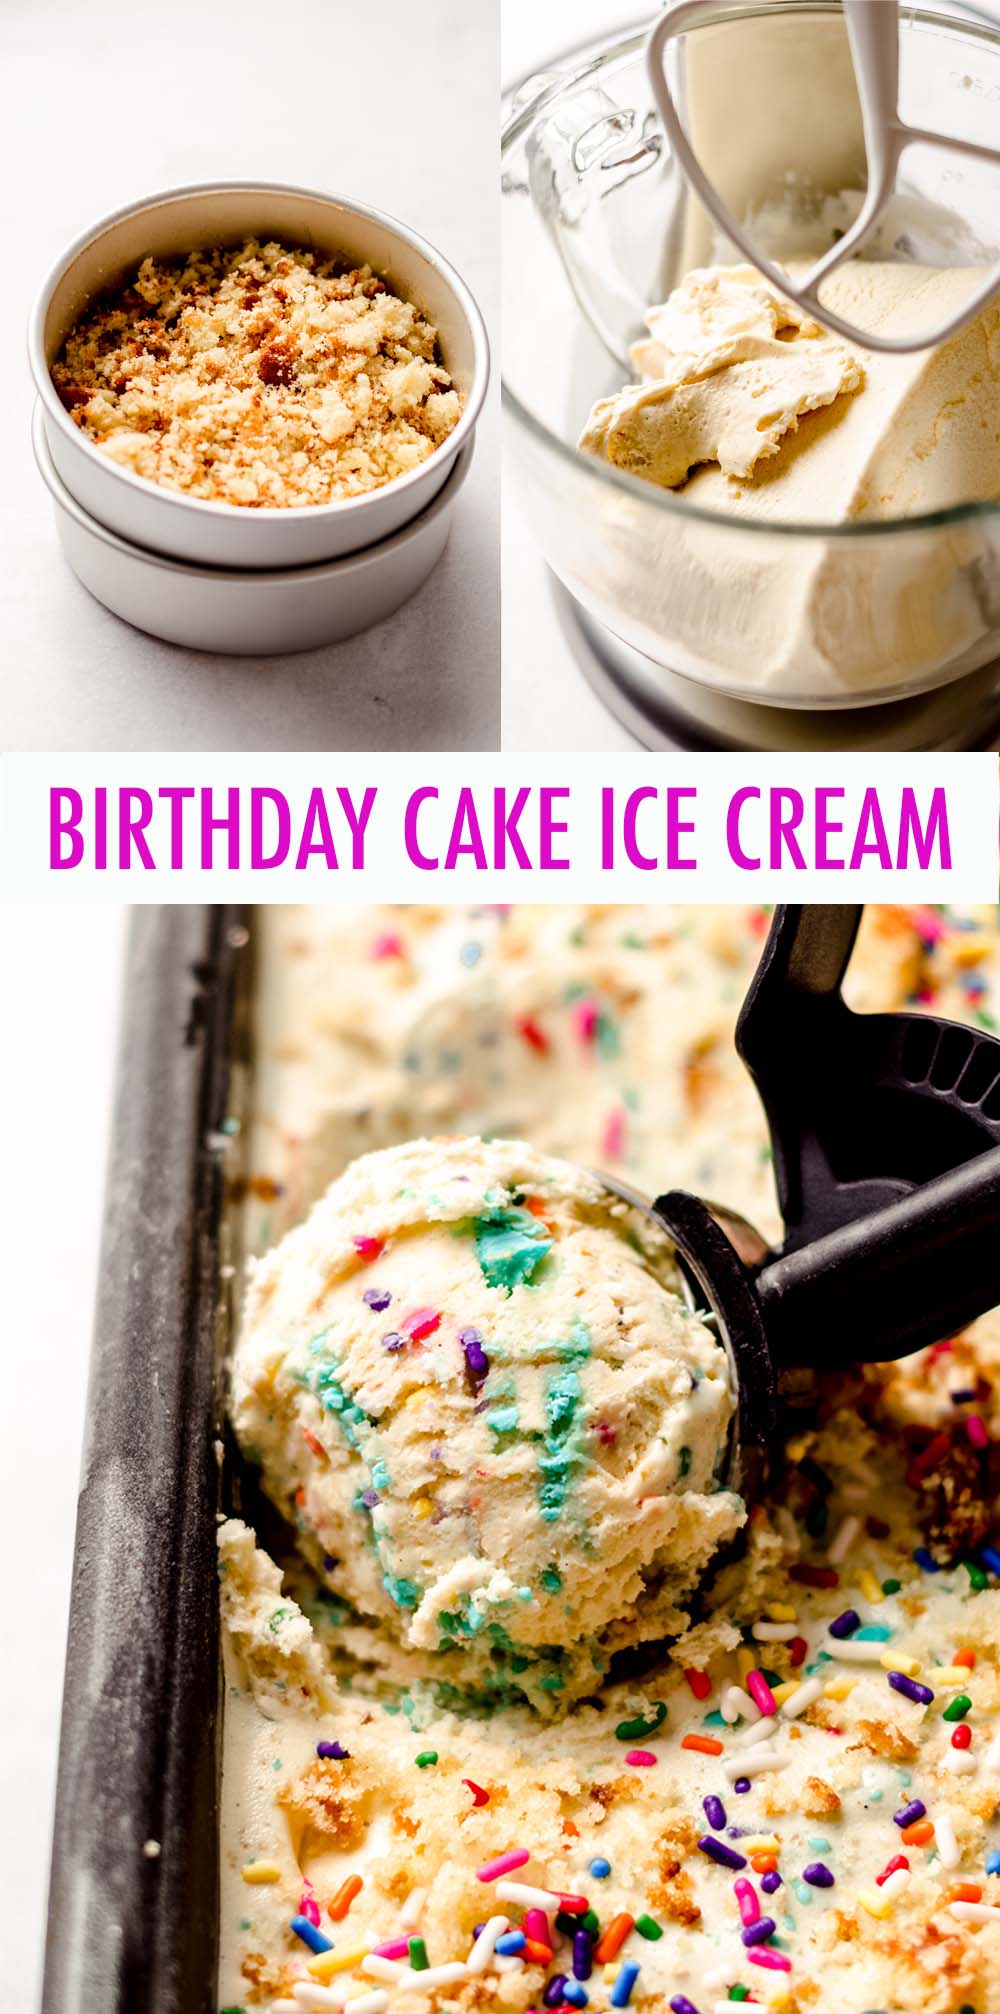 Use up cake trimmings and leftover frosting (or leftover cupcakes) to jazz up store-bought ice cream, or go for gold and make your own ice cream base! via @frshaprilflours